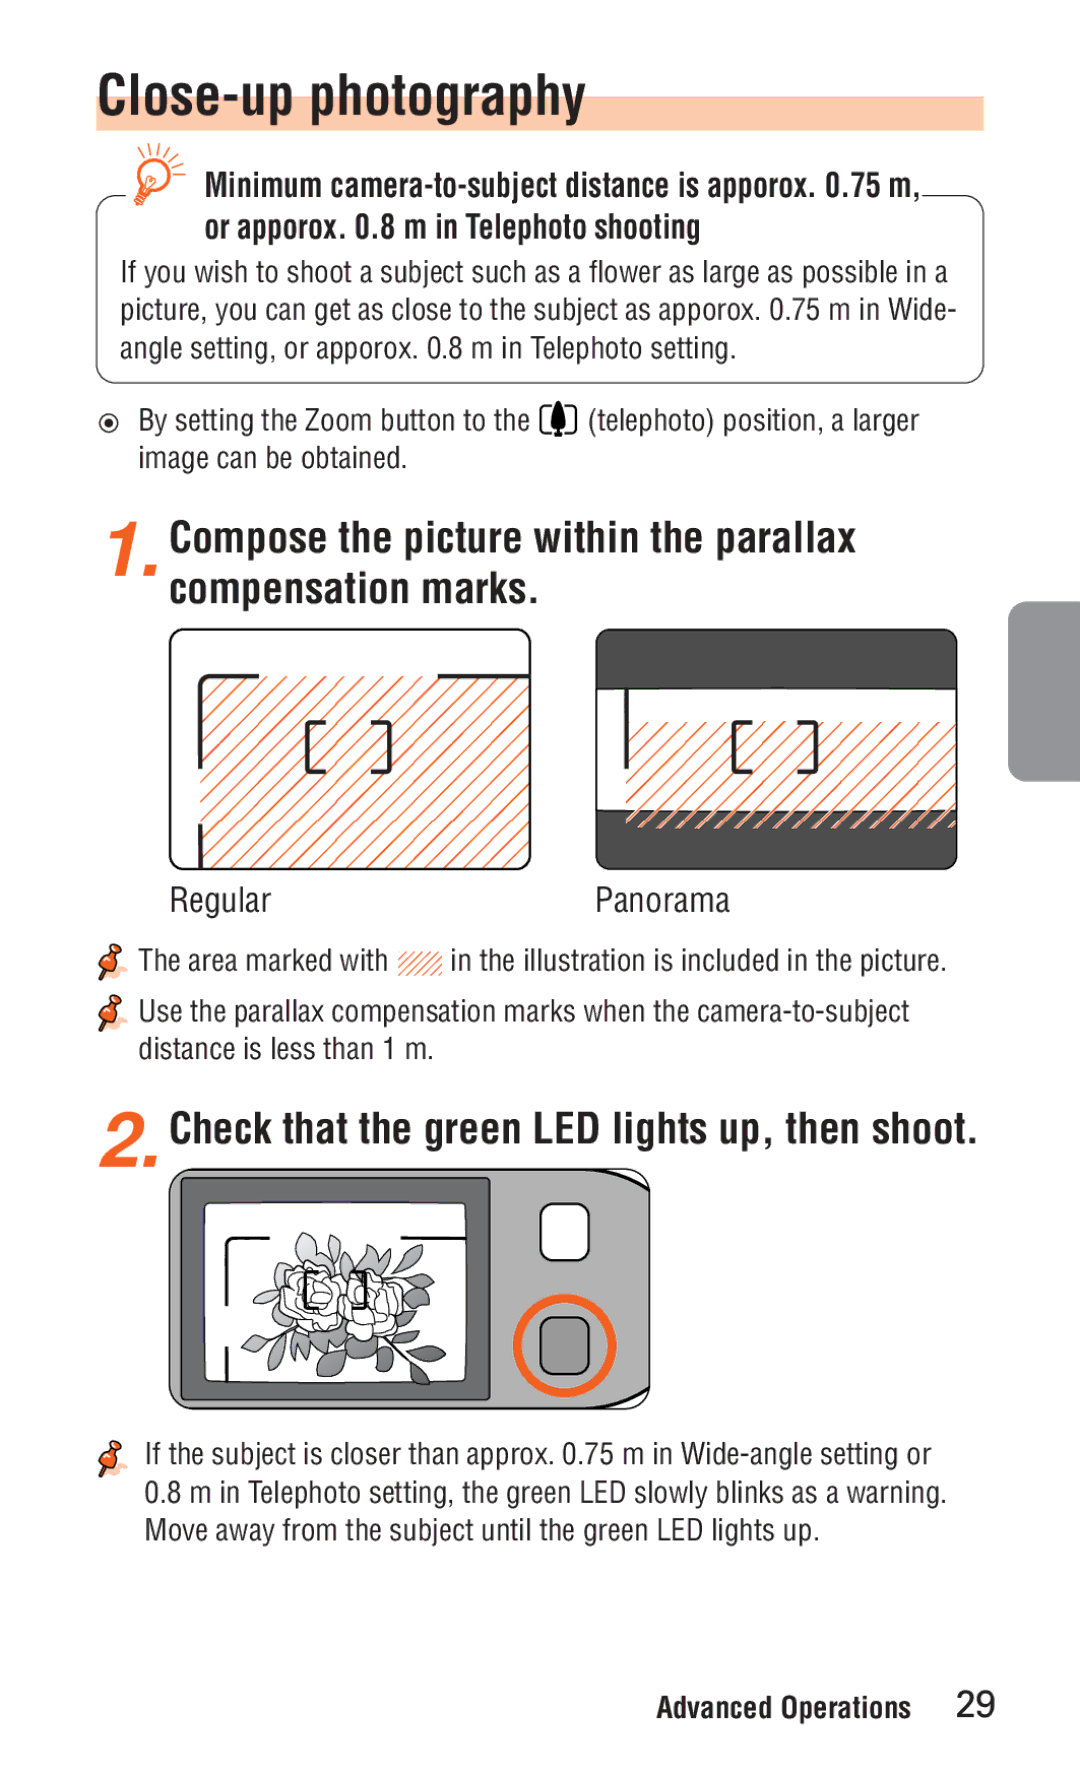 Nikon ED 120 instruction manual Close-up photography, Compose the picture within the parallax compensation marks 